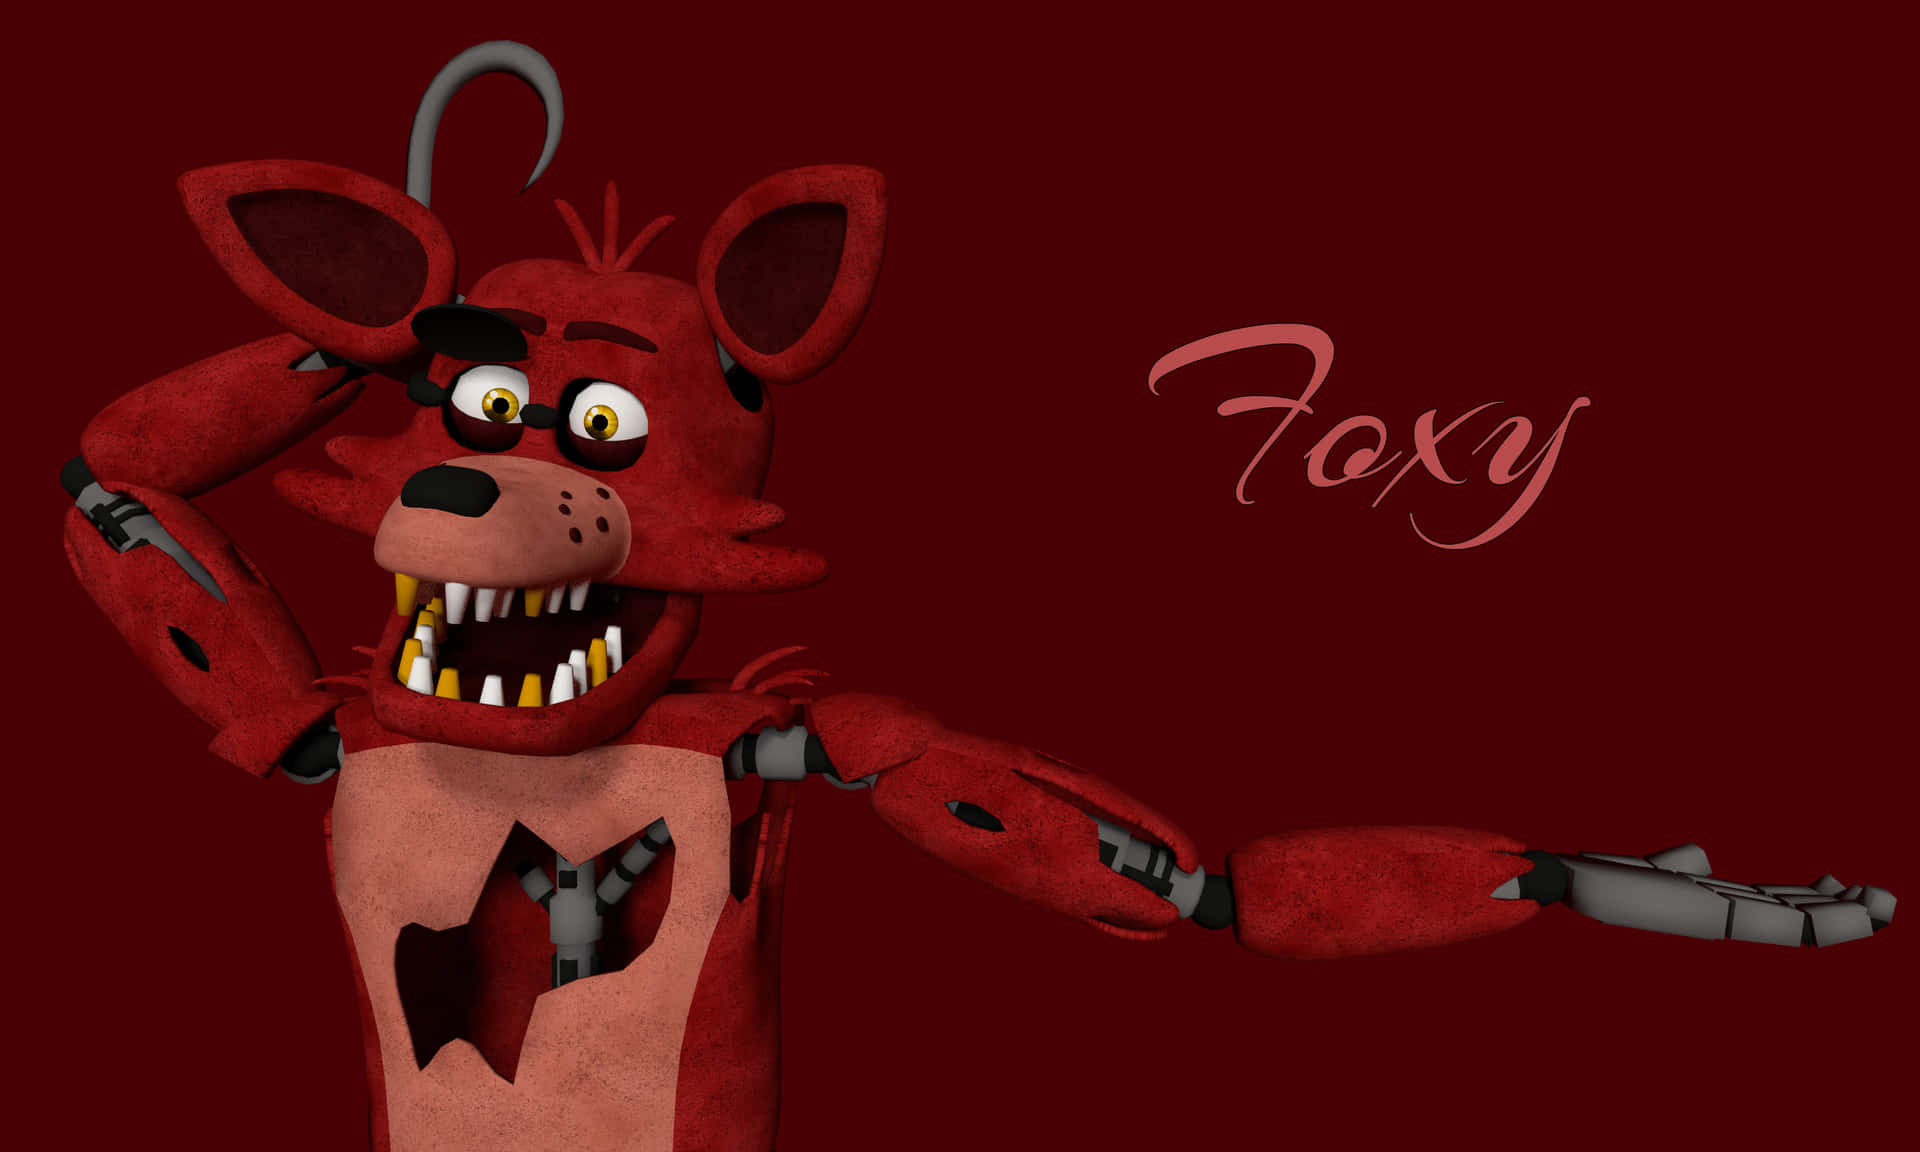 Foxy The Pirate in Action Wallpaper